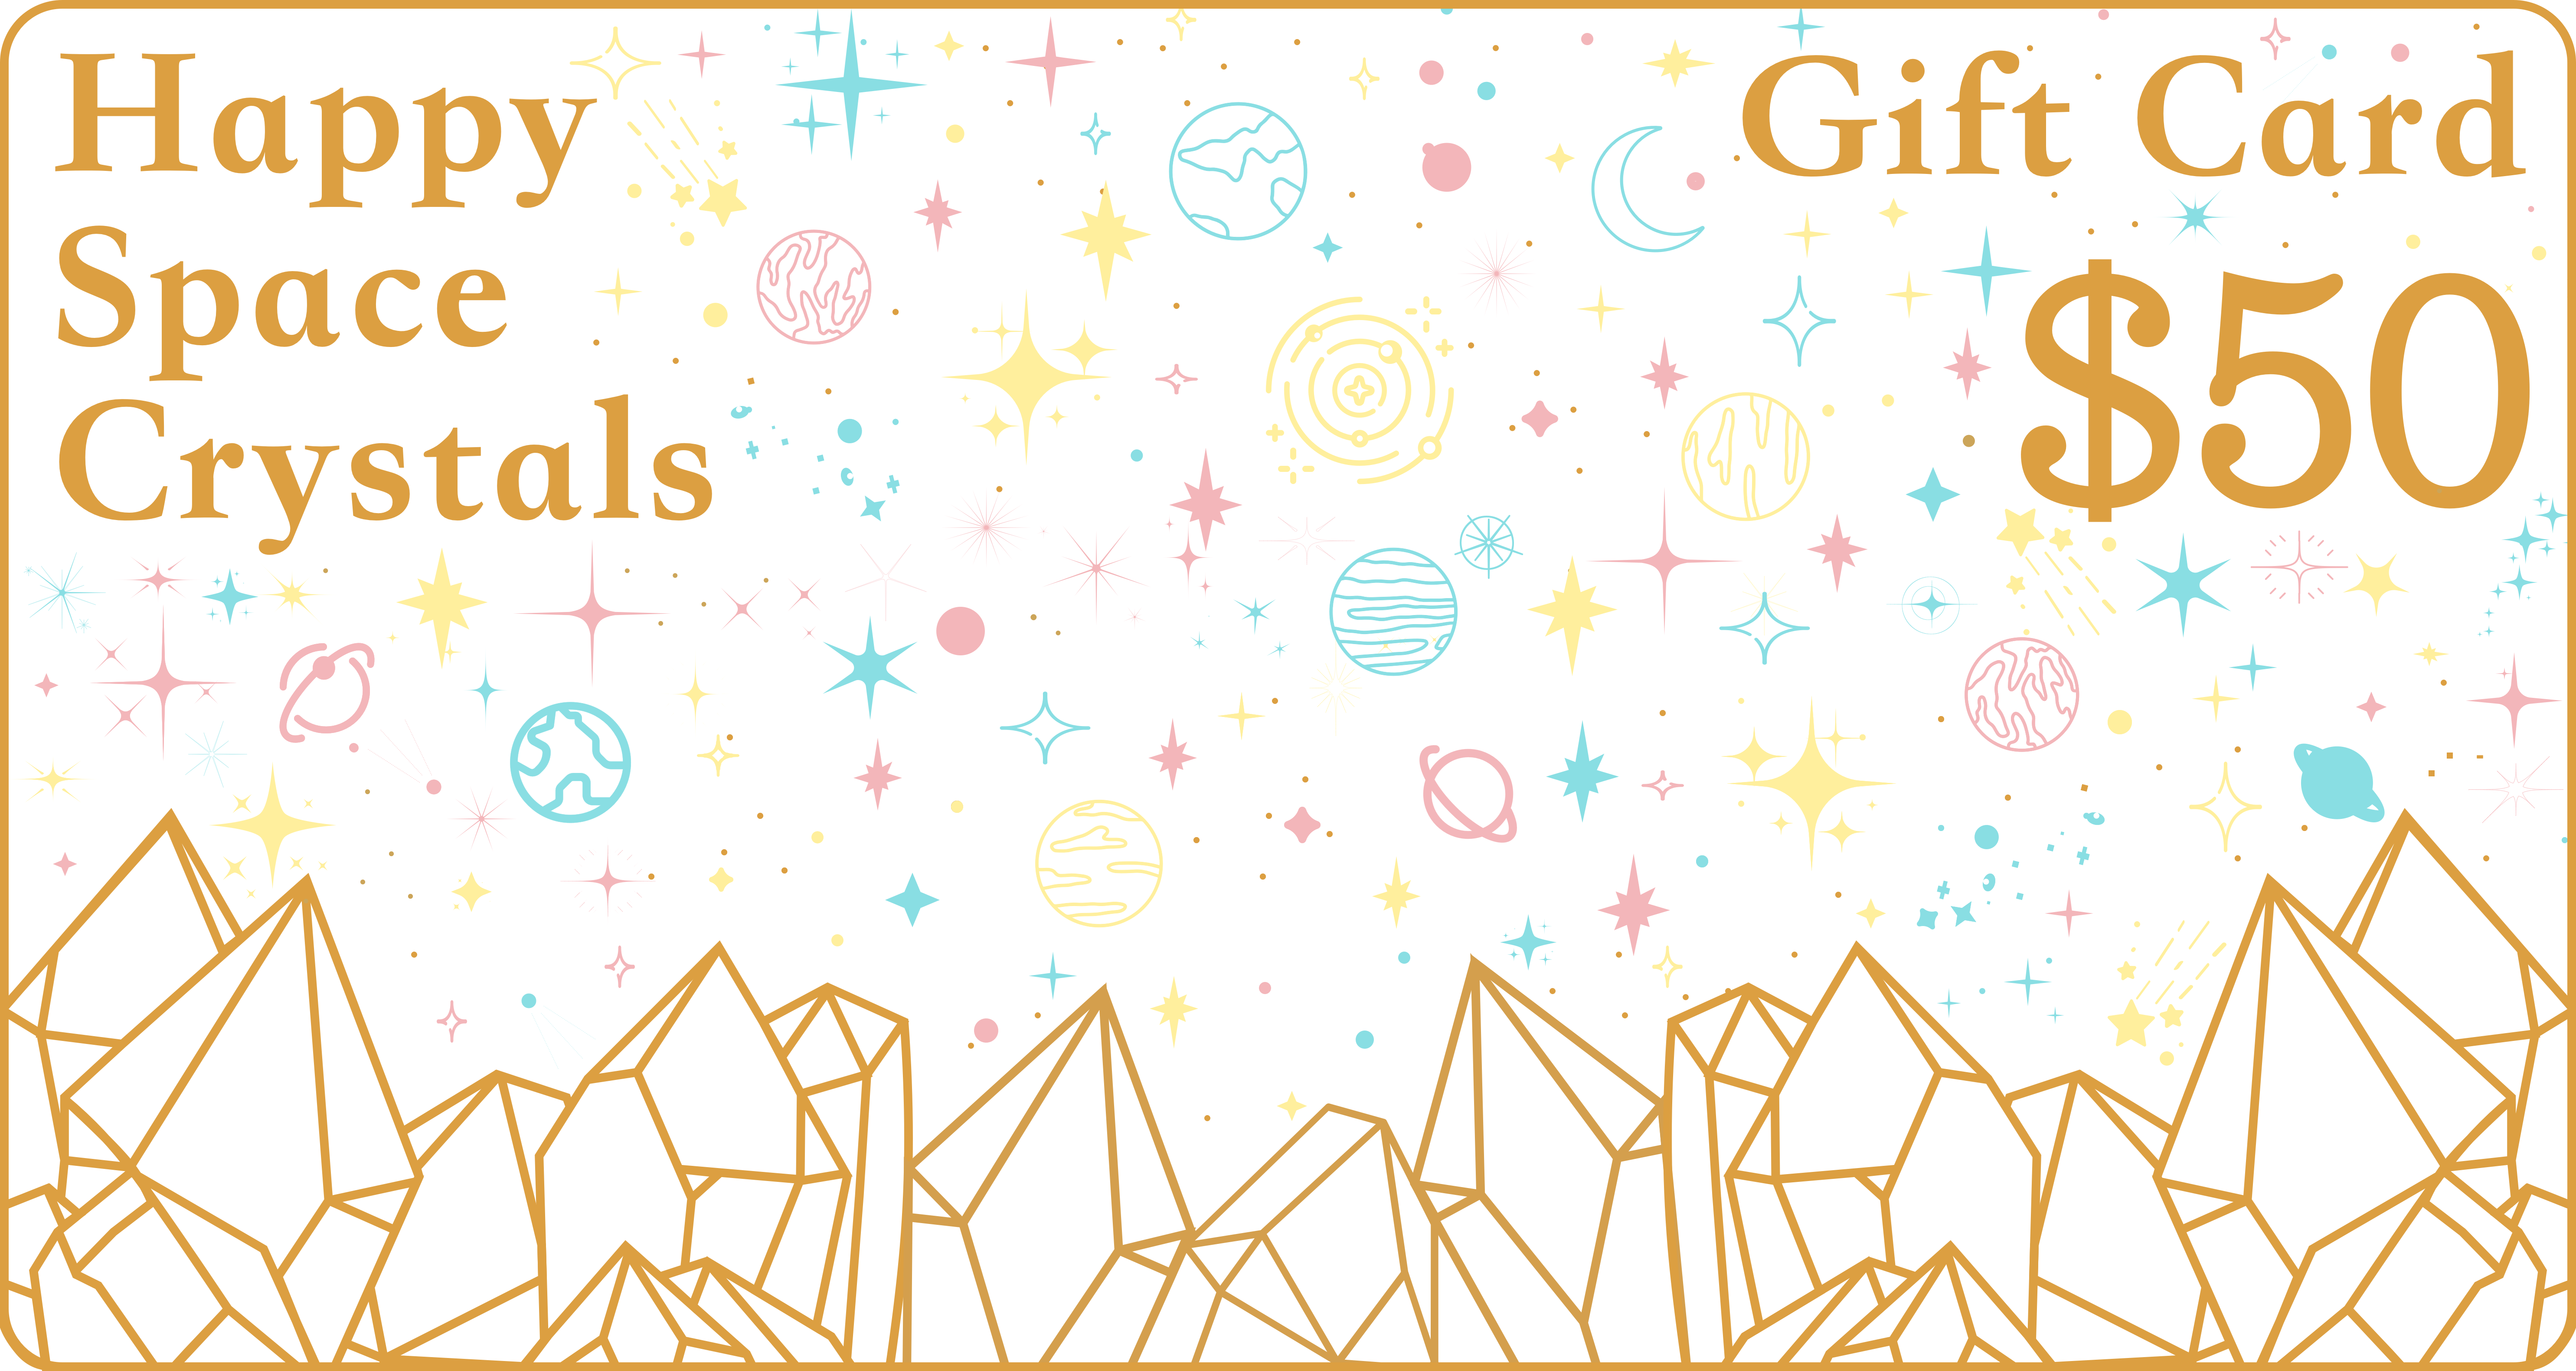 Happy Space Crystals Gift Card